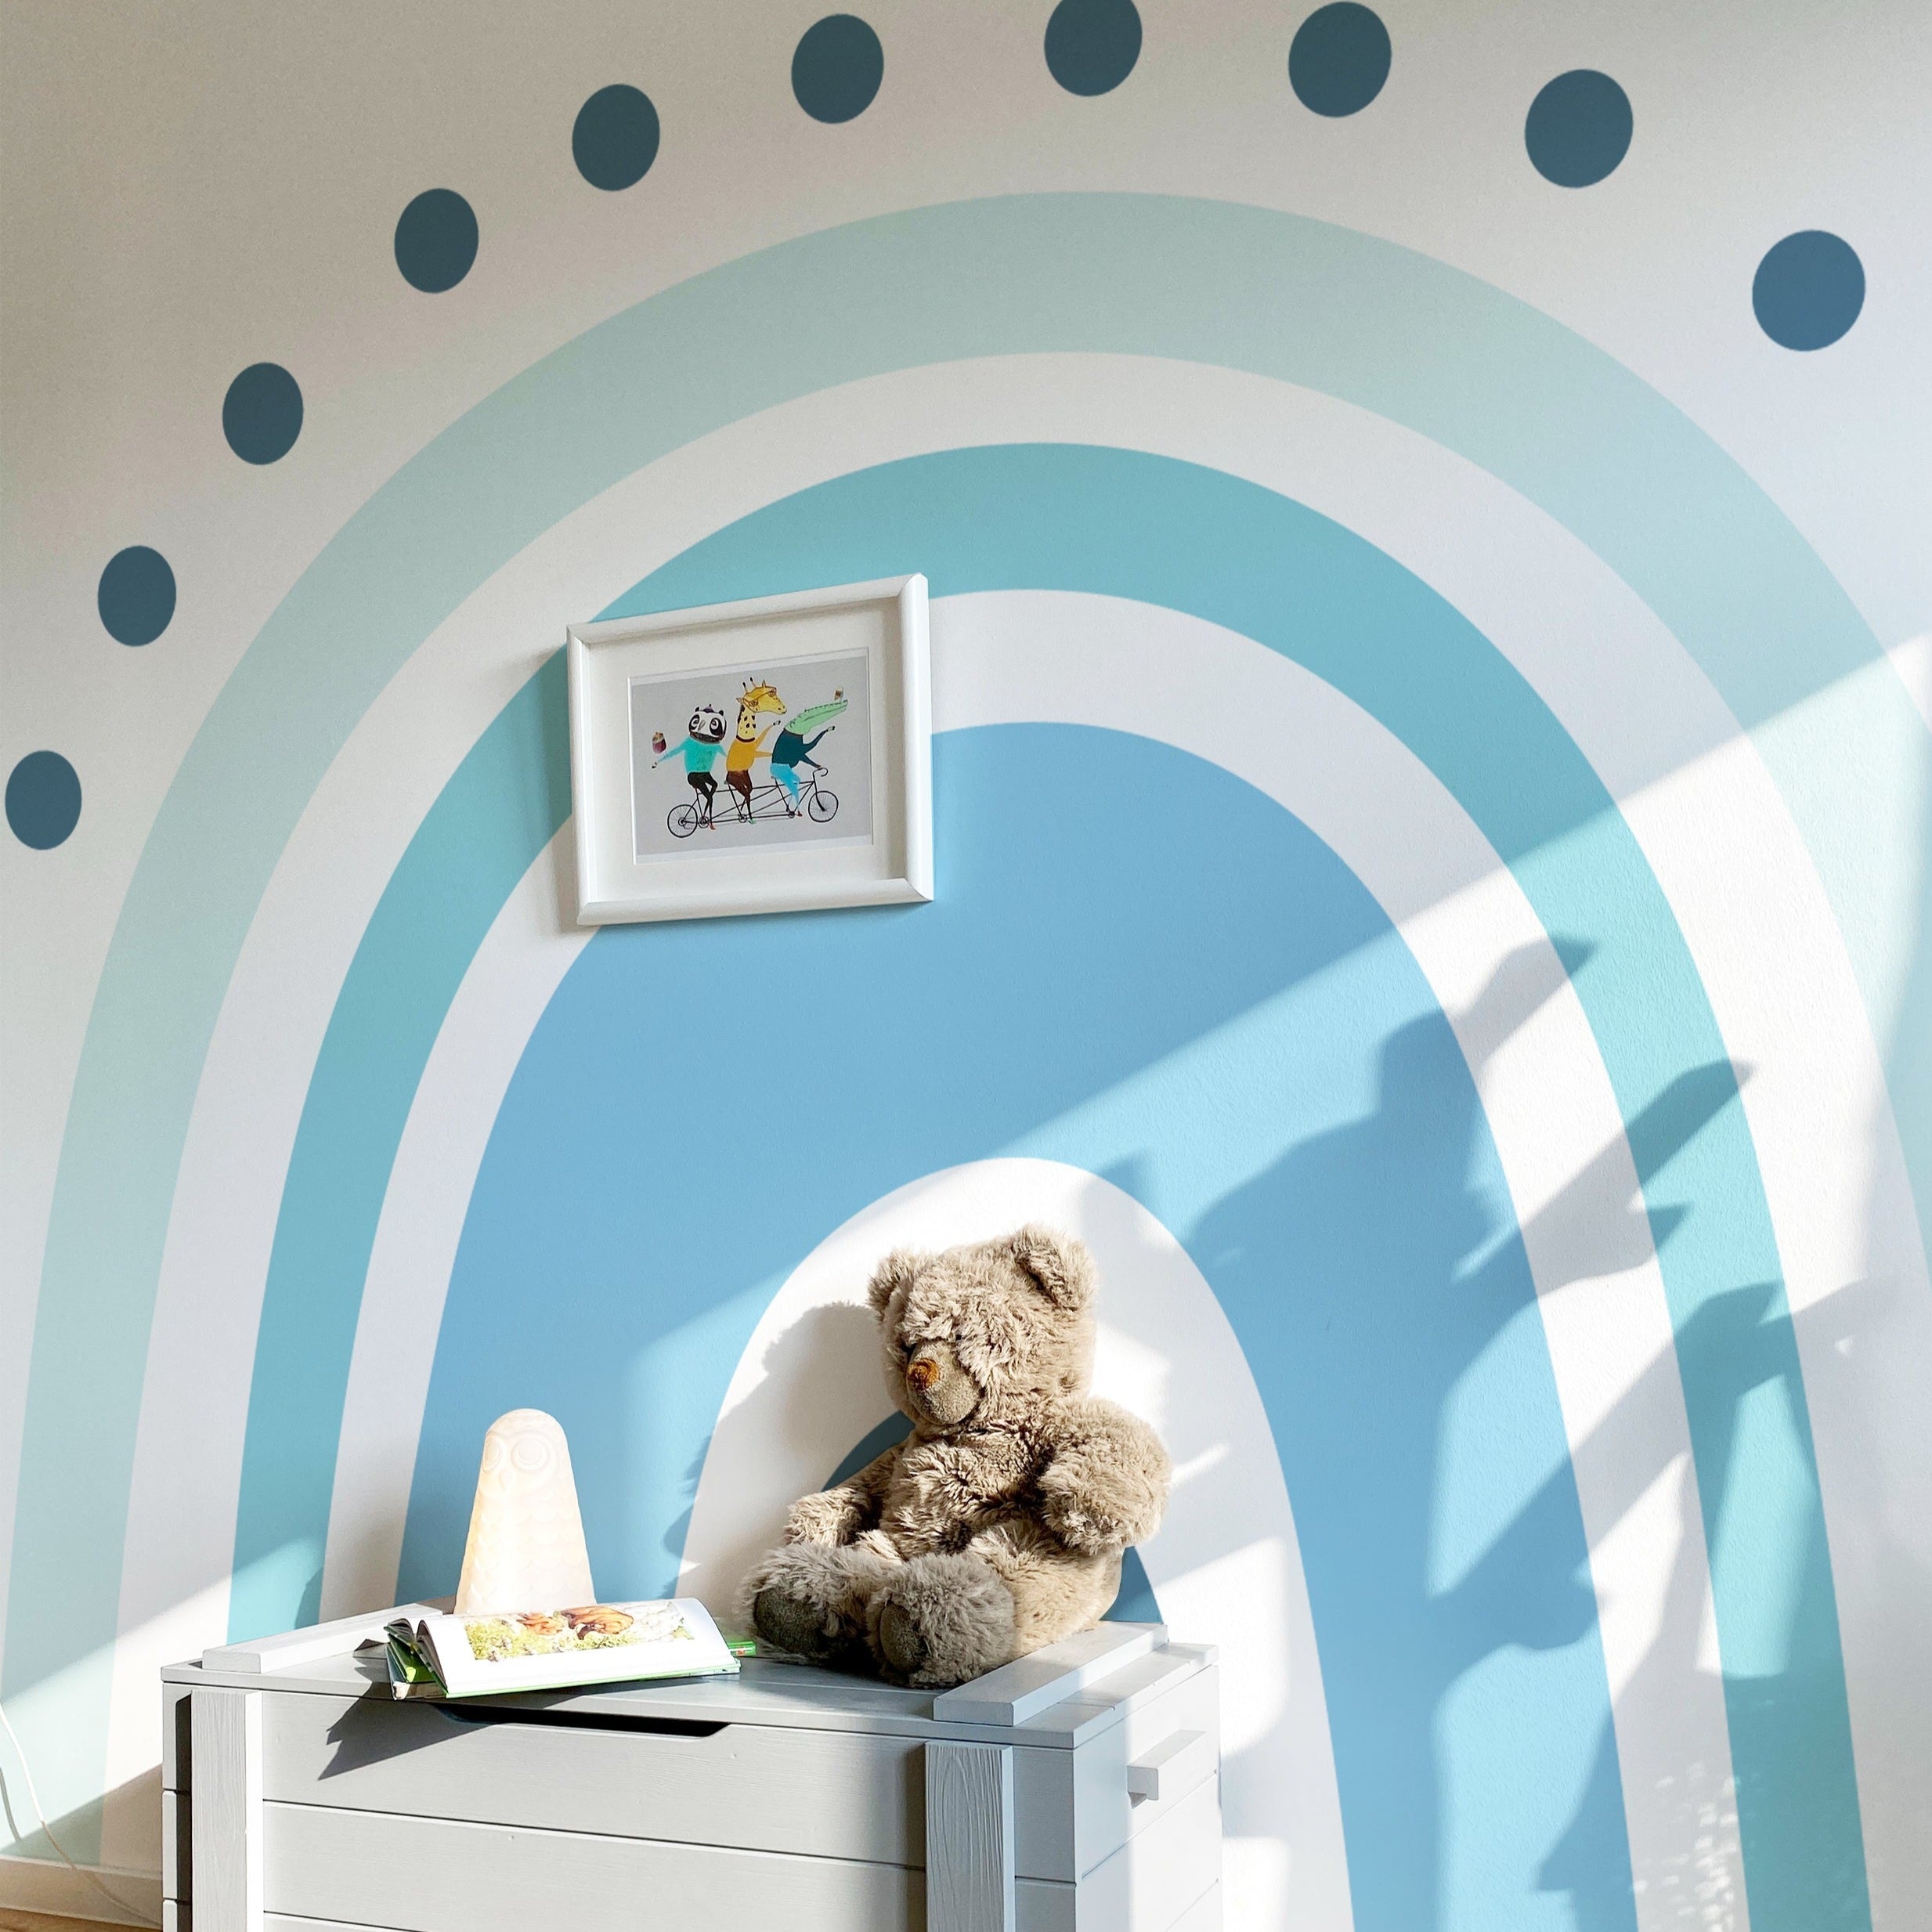 A child’s room adorned with the Rainbow Wallpaper Mural - Aurora, creating a joyful and playful atmosphere. The mural includes large blue and turquoise arches with a polka dot pattern, complemented by a framed illustration of cartoon characters on a bike, a teddy bear, and children's books, offering a vibrant and inviting space.